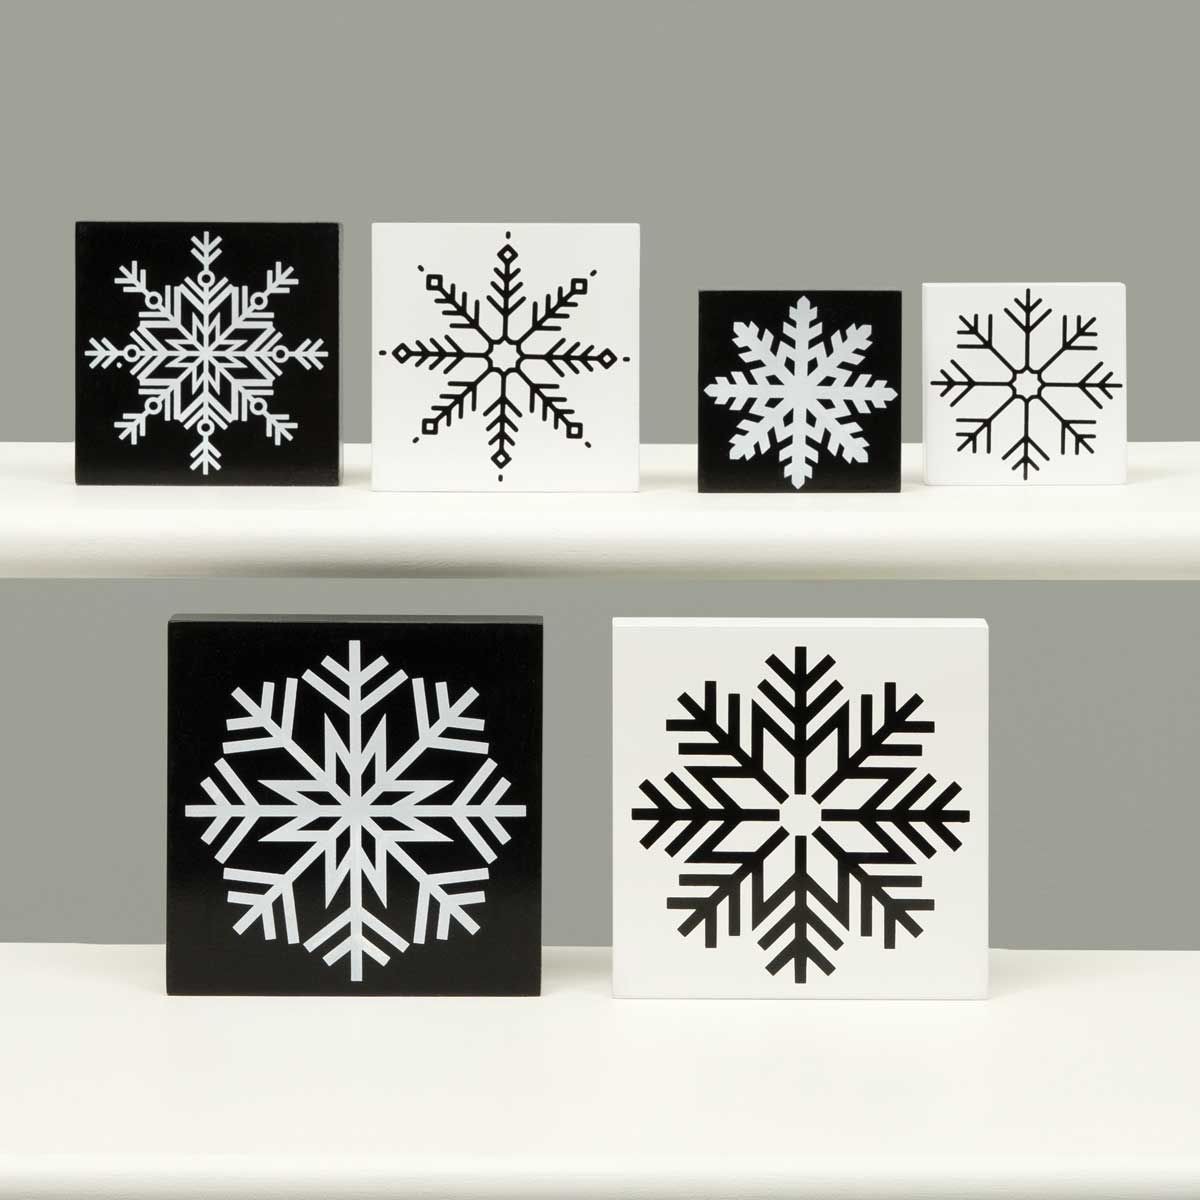 BLOCK SNOWFLAKE BK 2 ASSORTED LARGE 5IN X .75IN X 5IN